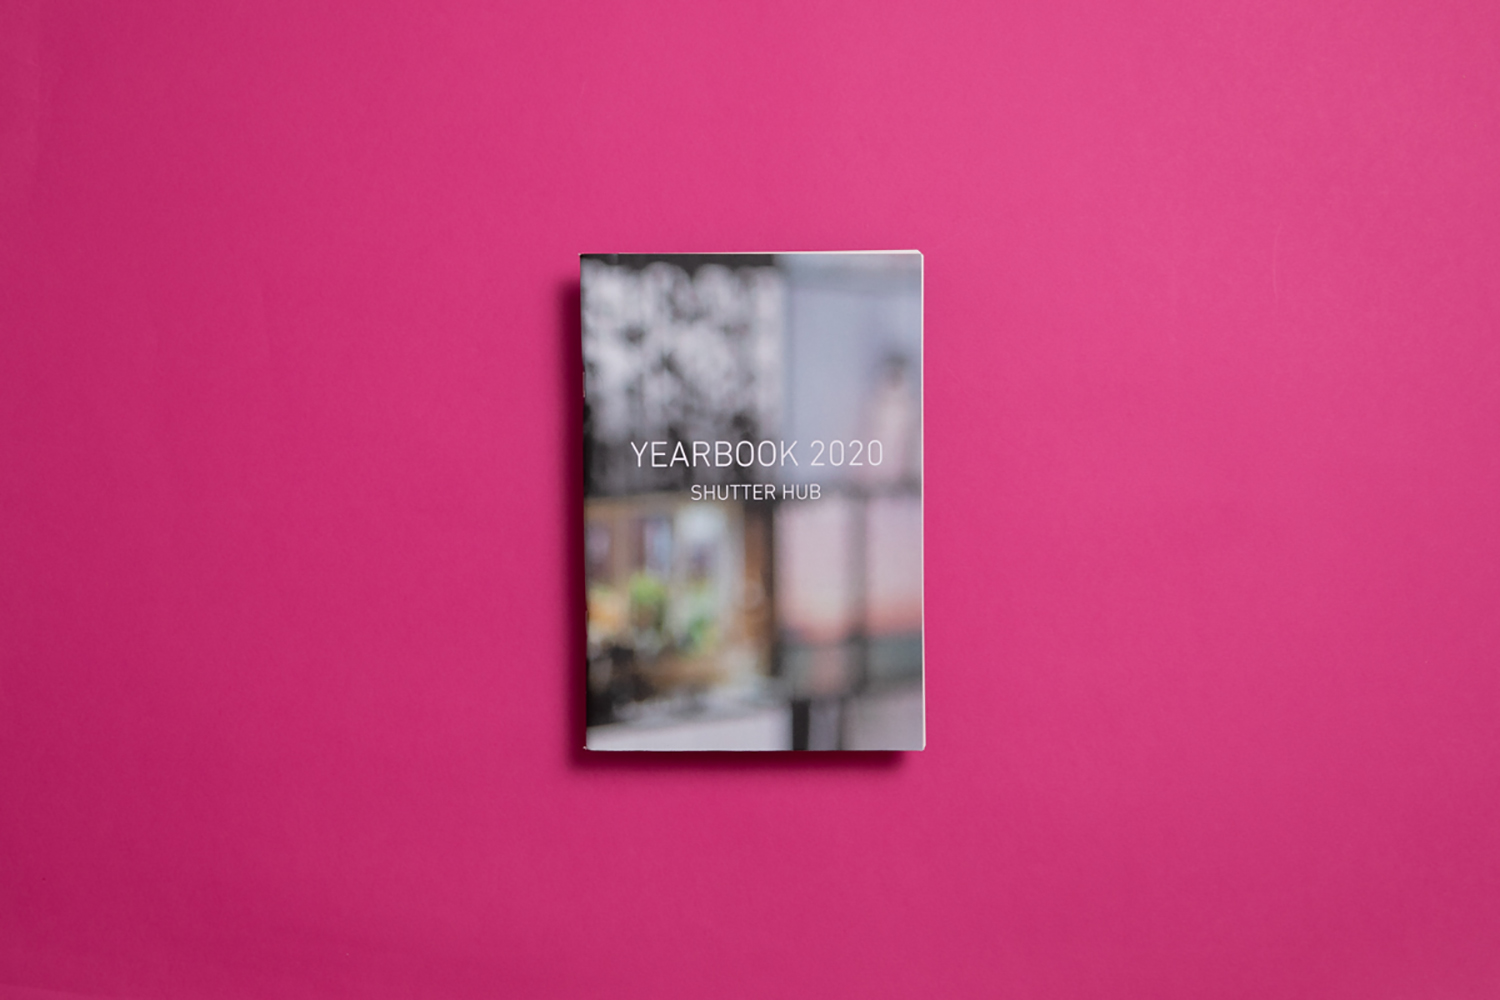 YEARBOOK 2020 printed publication on a pink background